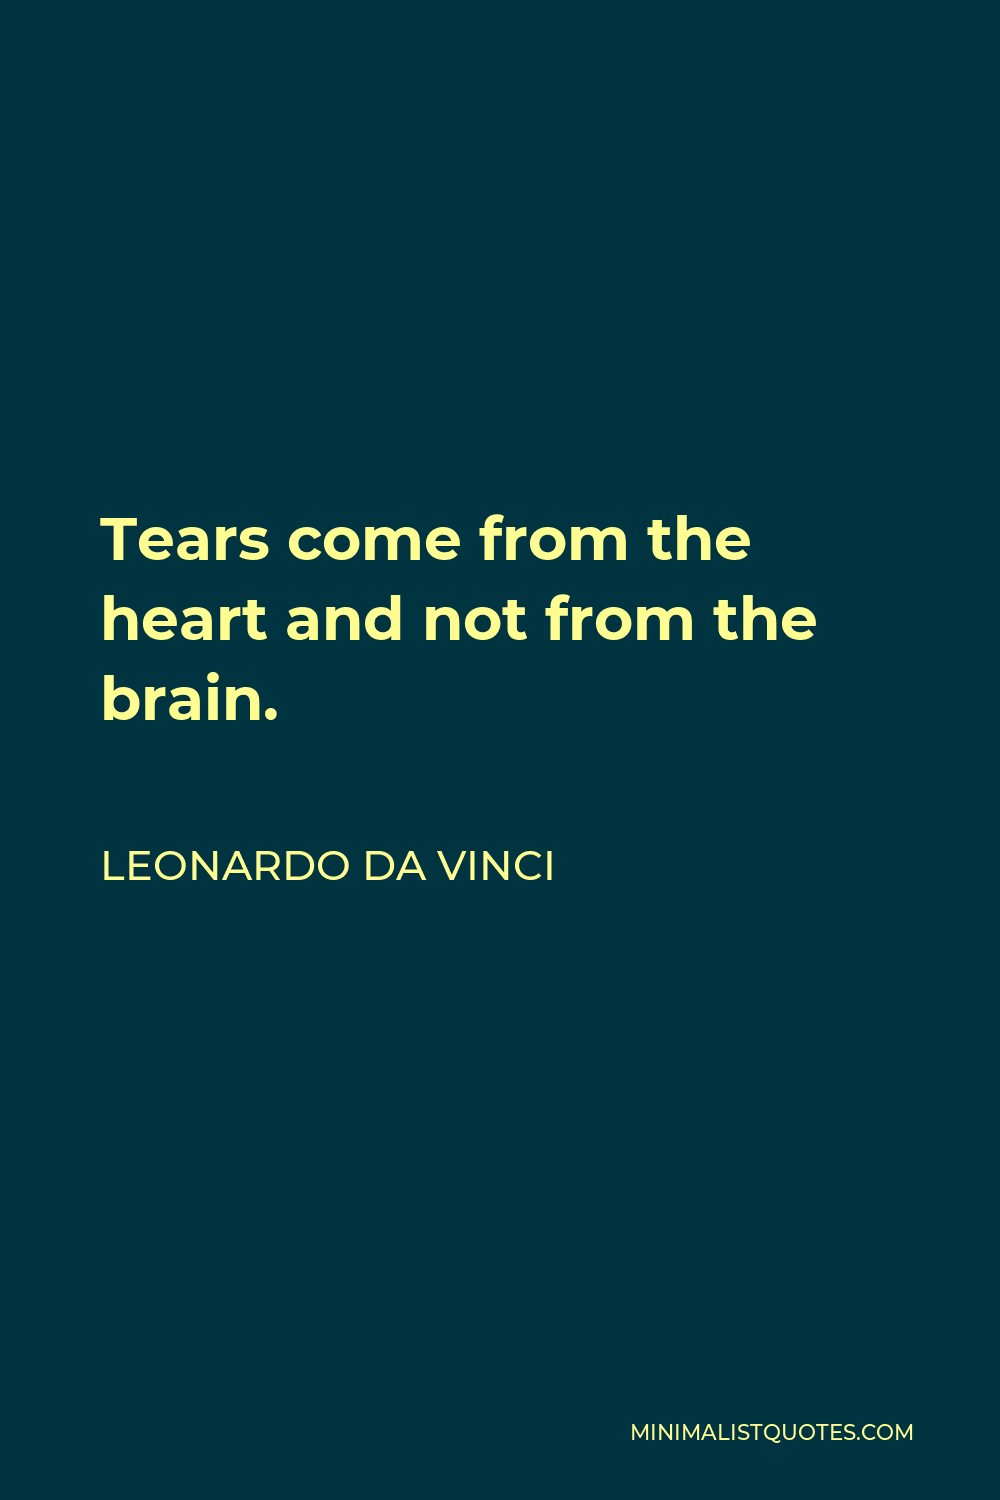 Leonardo da Vinci Quote - Tears come from the heart and not from the brain.